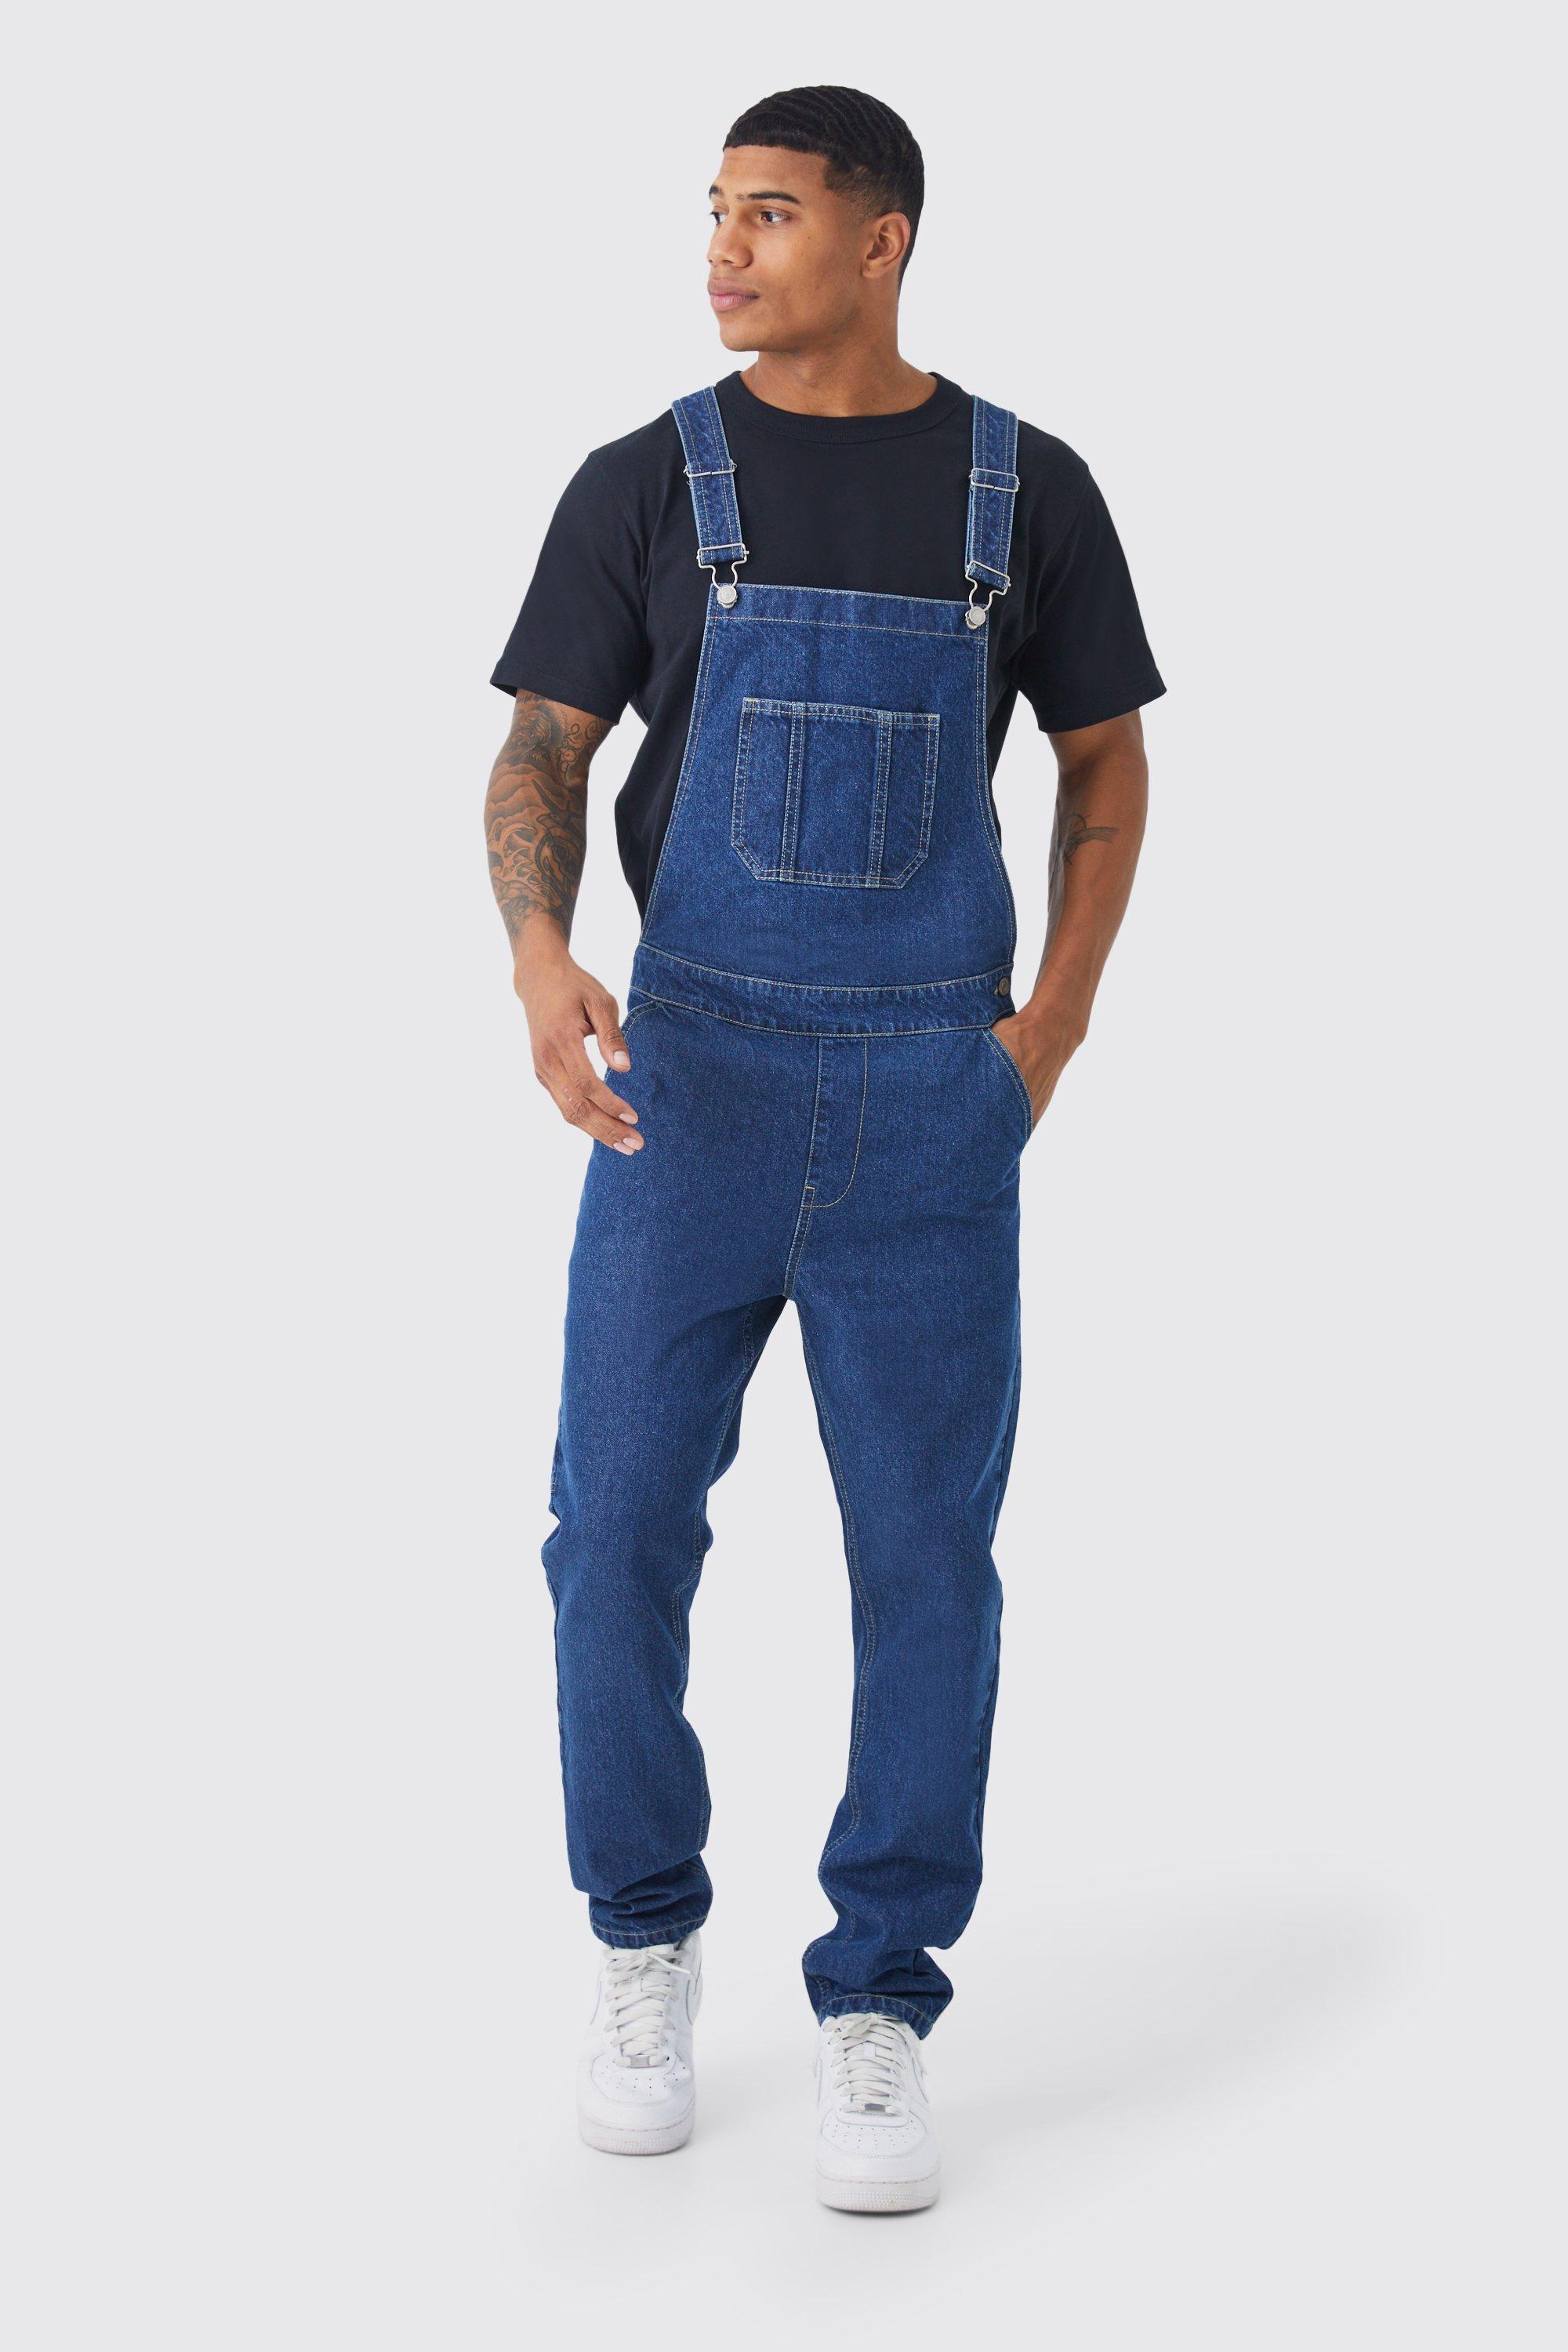 90s Outfits for Guys | Trendy, Party, Cool, Casual Mens Full Length Denim Dungarees - Blue - M $70.00 AT vintagedancer.com